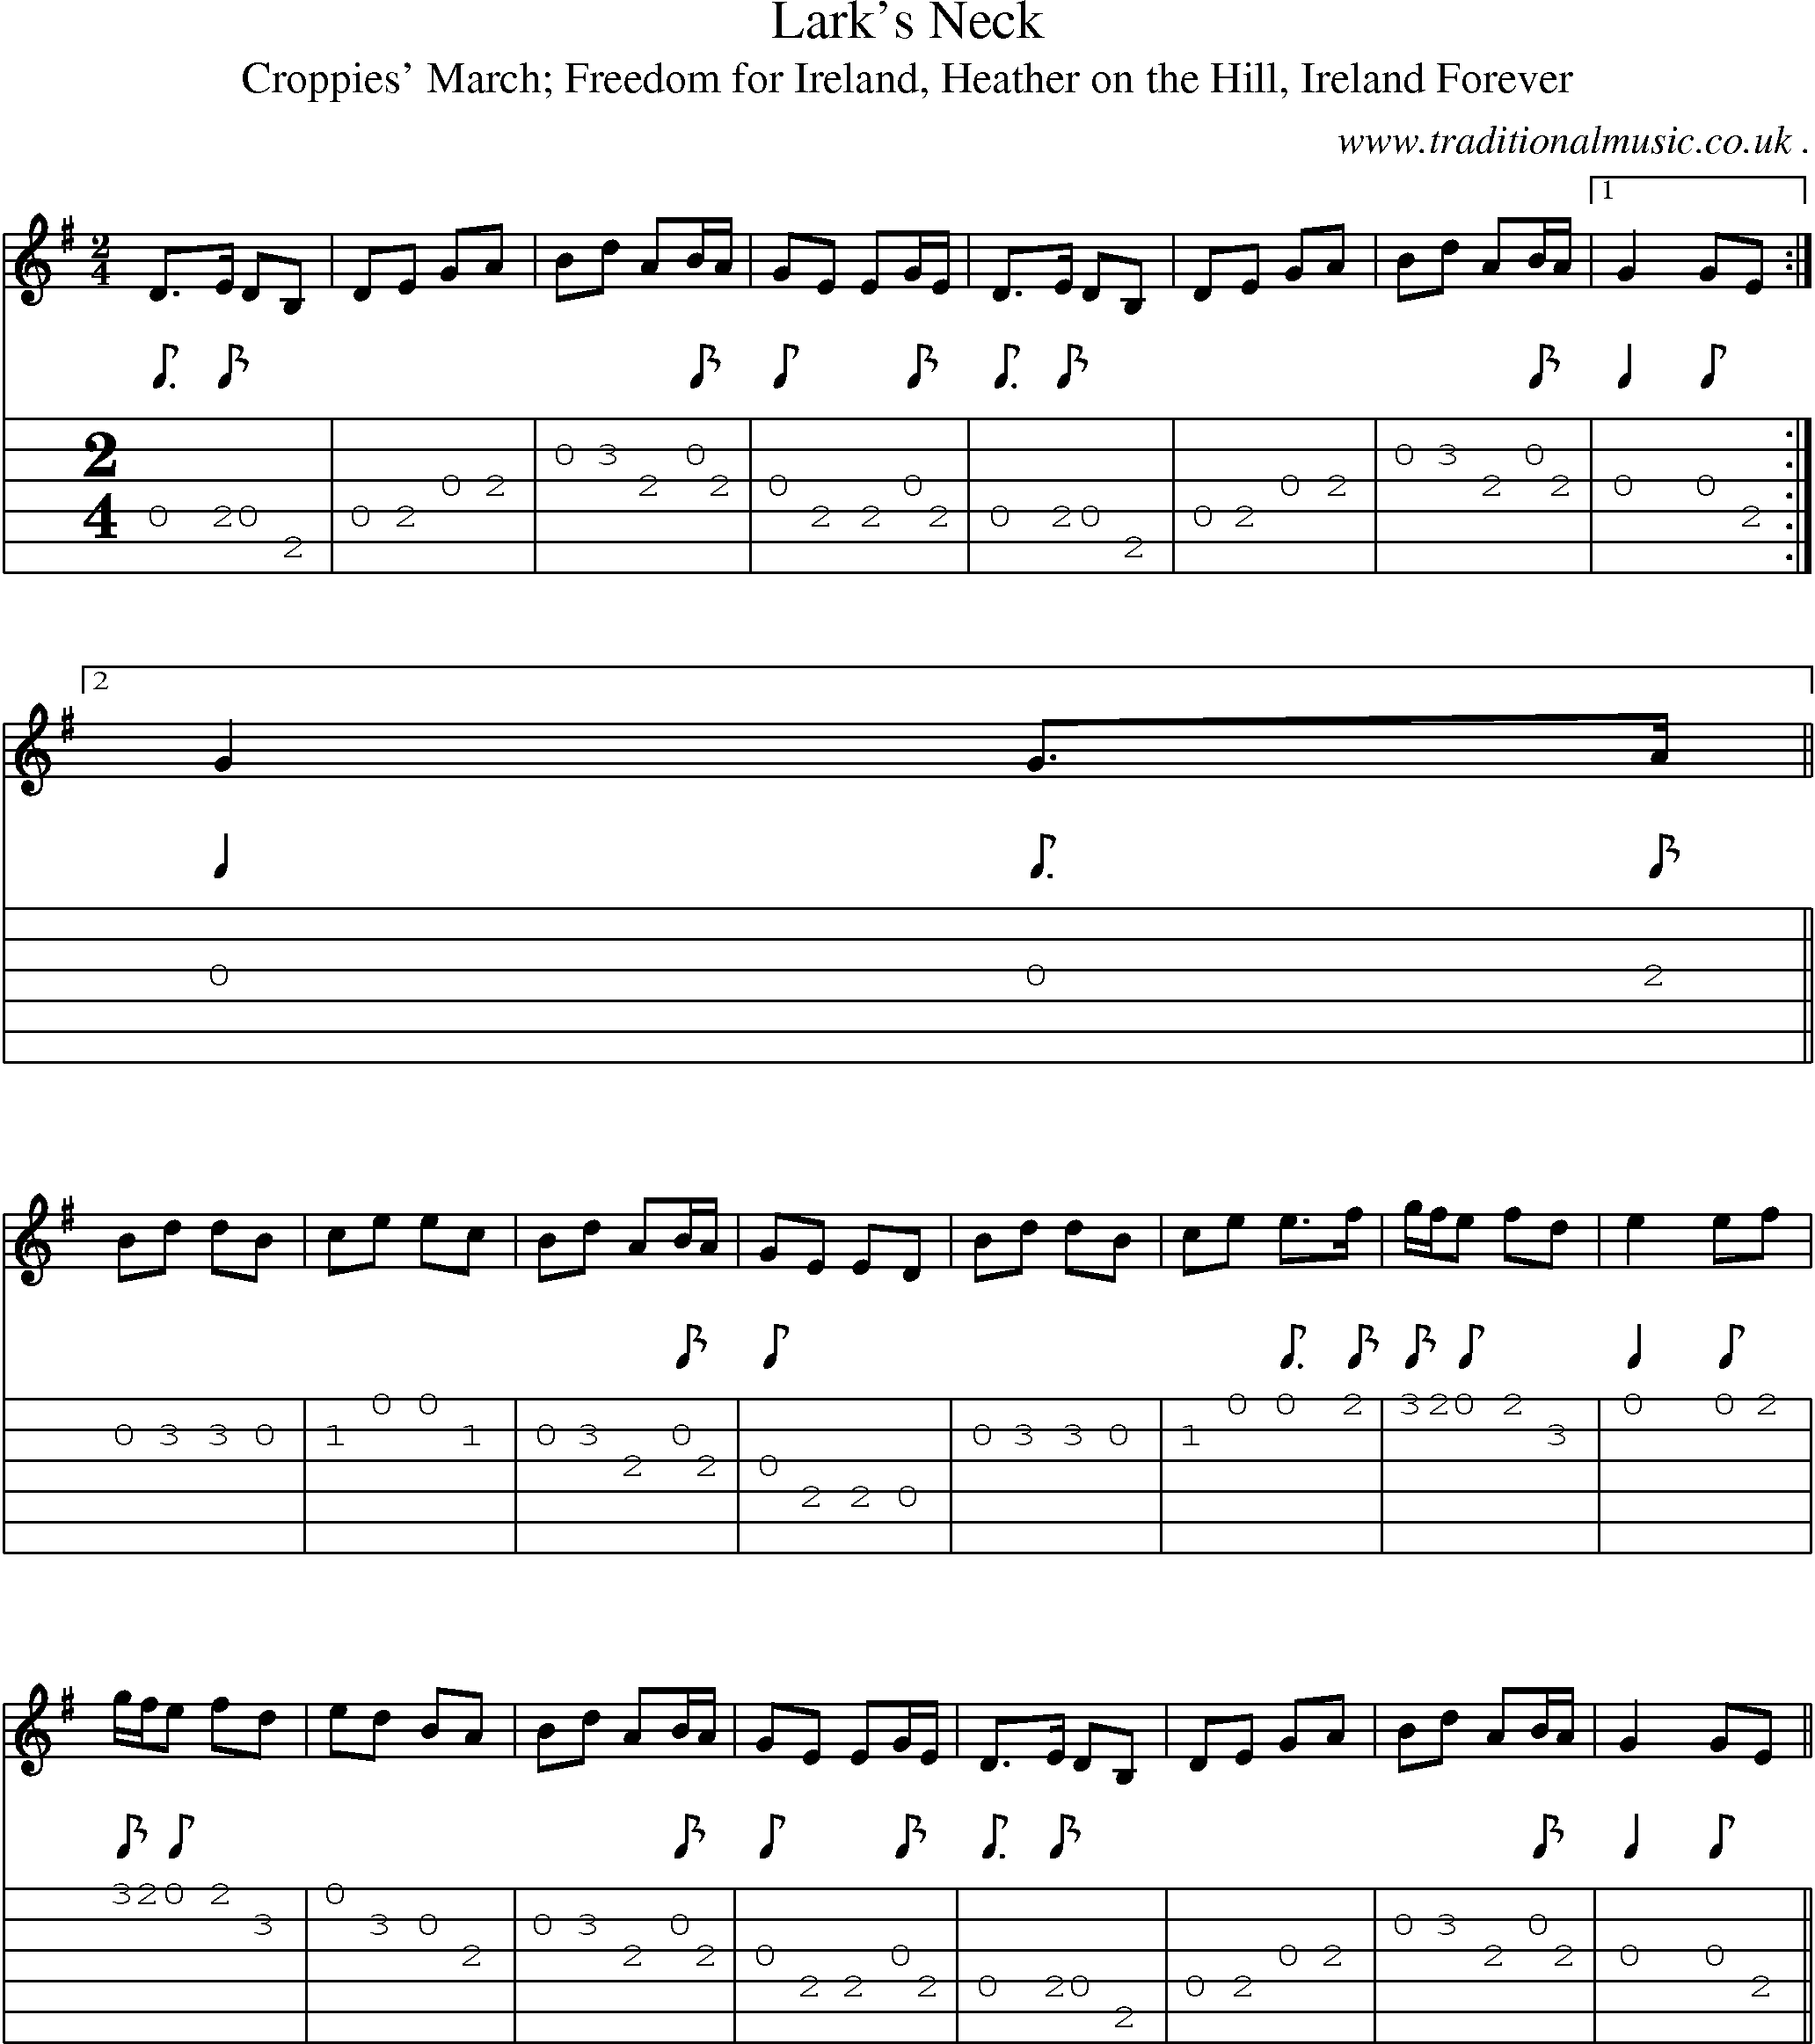 Sheet-Music and Guitar Tabs for Larks Neck